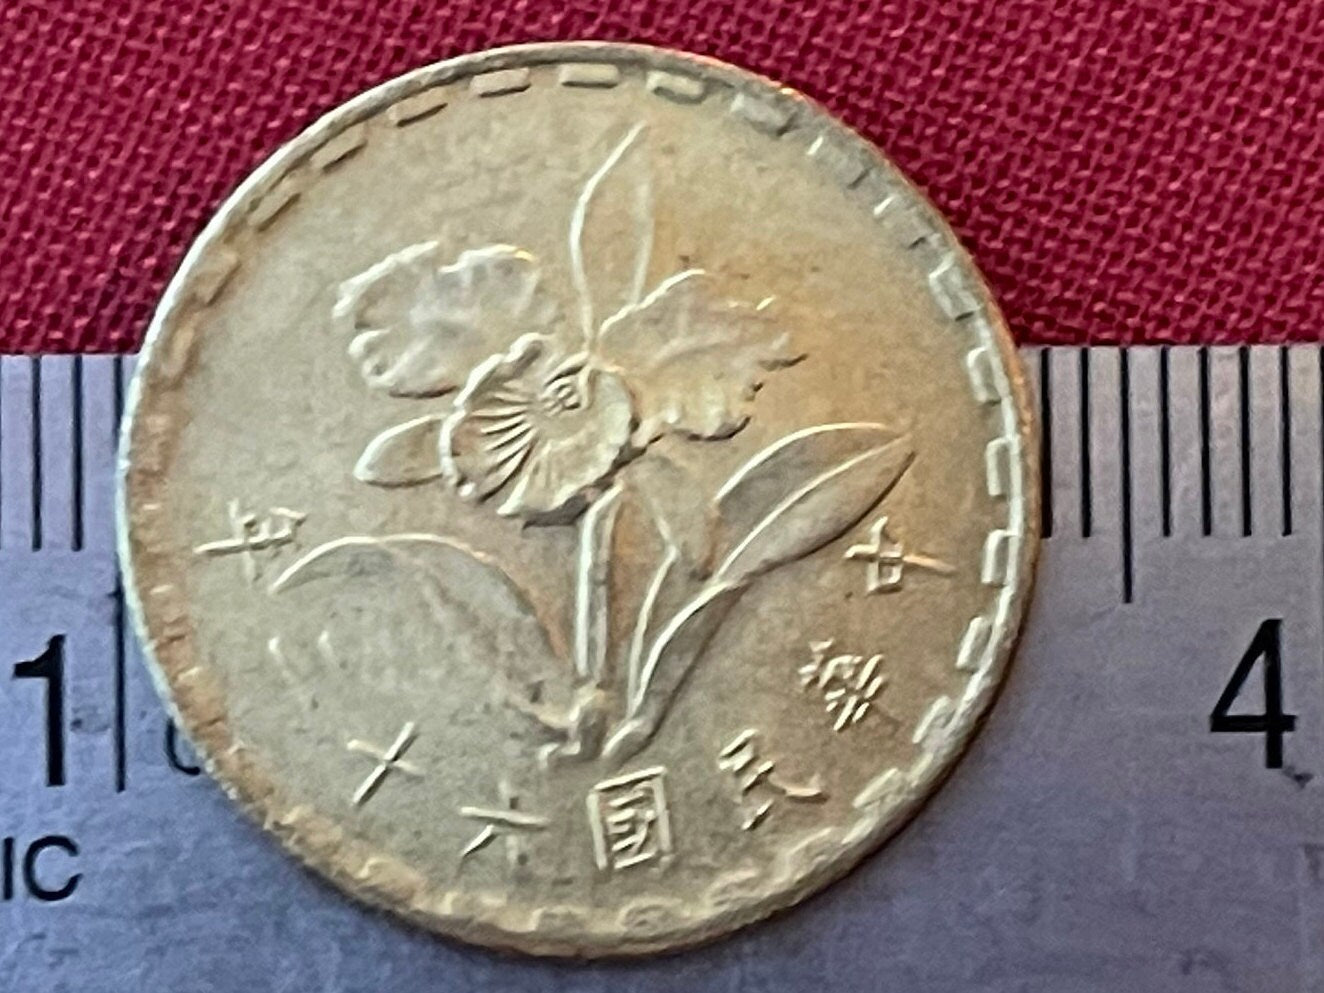 Mayling Orchid 5 Jiao Taiwan Authentic Coin Money for Jewelry and Craft Making (Republic of China)